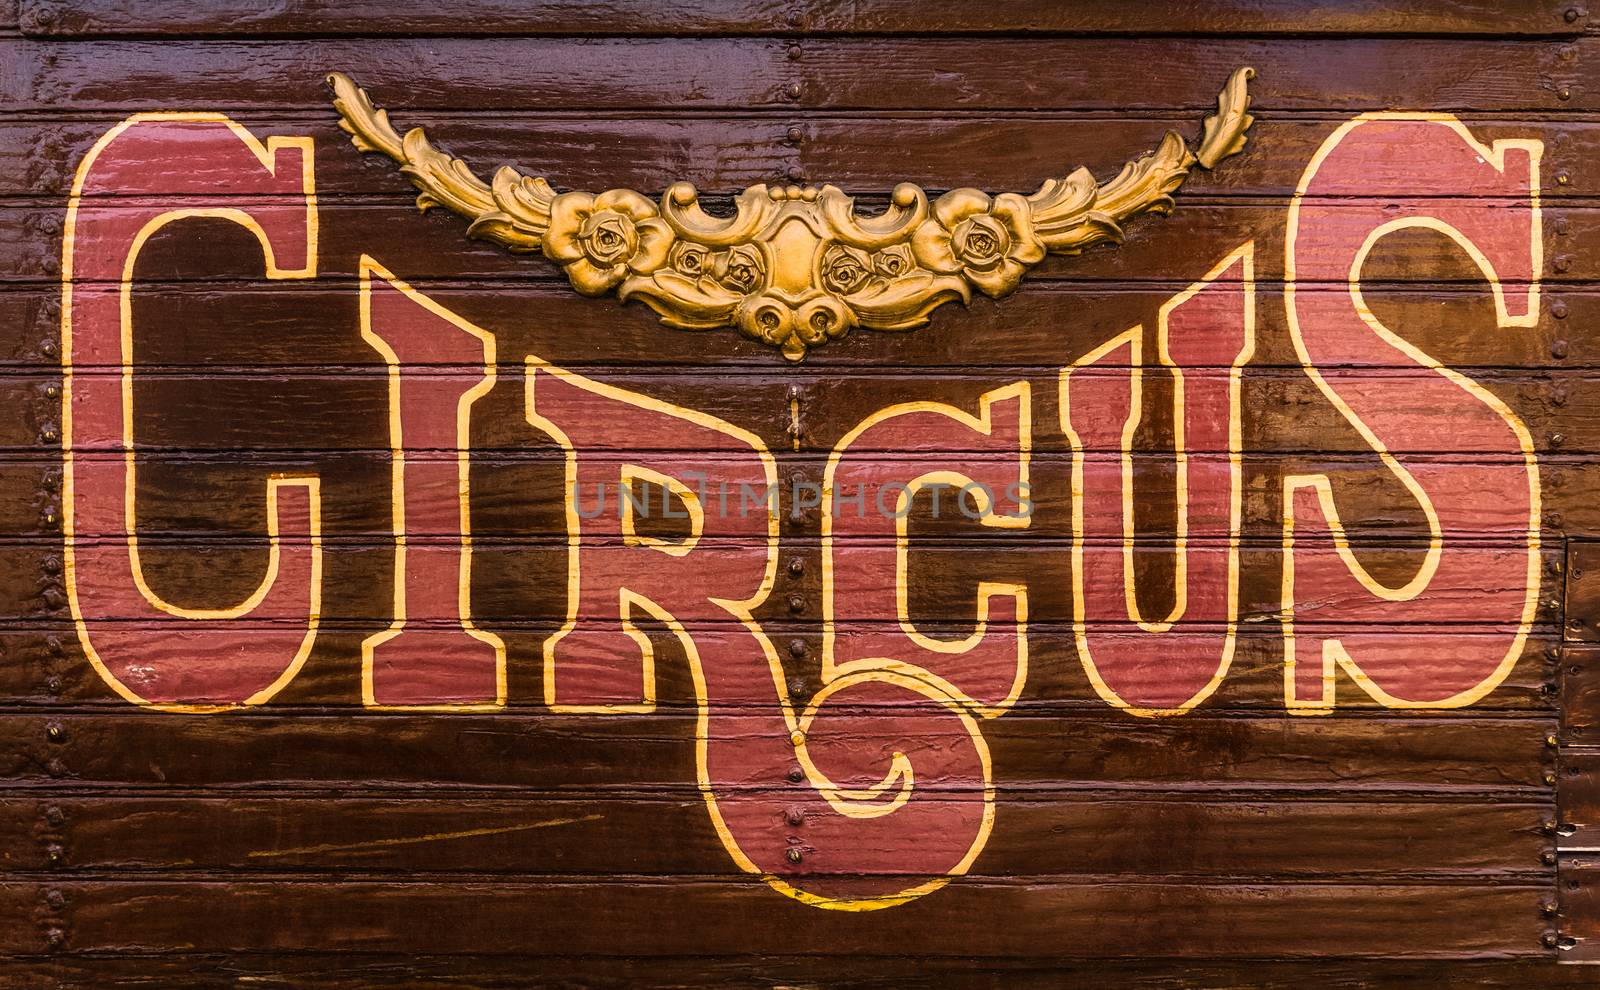 Retro Style Rustic Circus Sign On The Side Of A Caravan Or Wagon